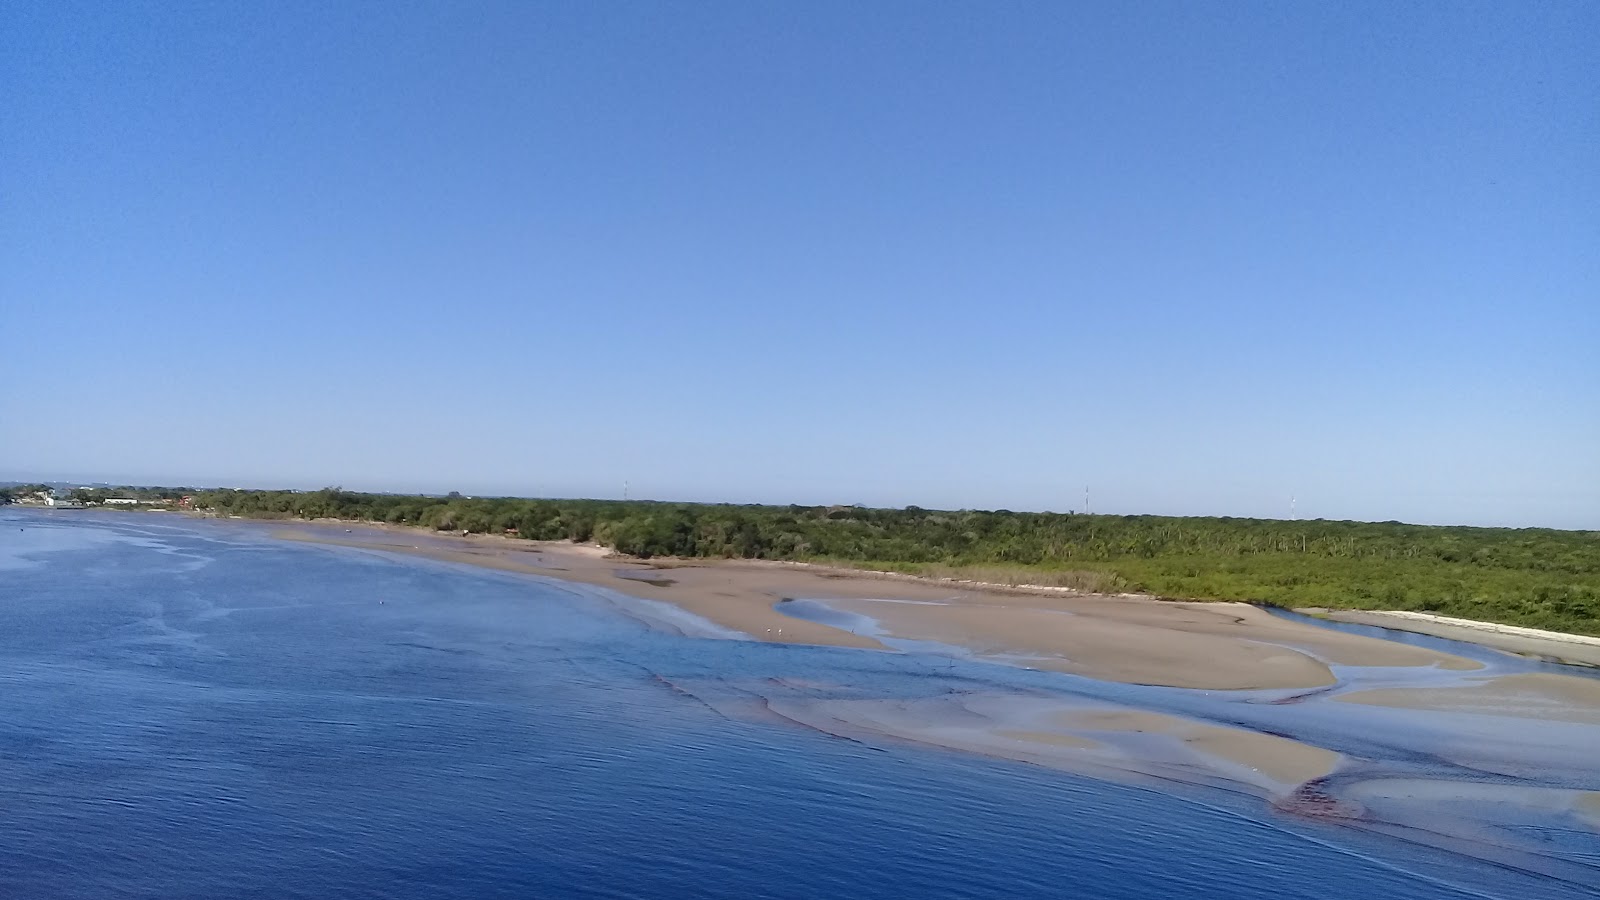 Photo of Pontal do Sul Beach with long straight shore